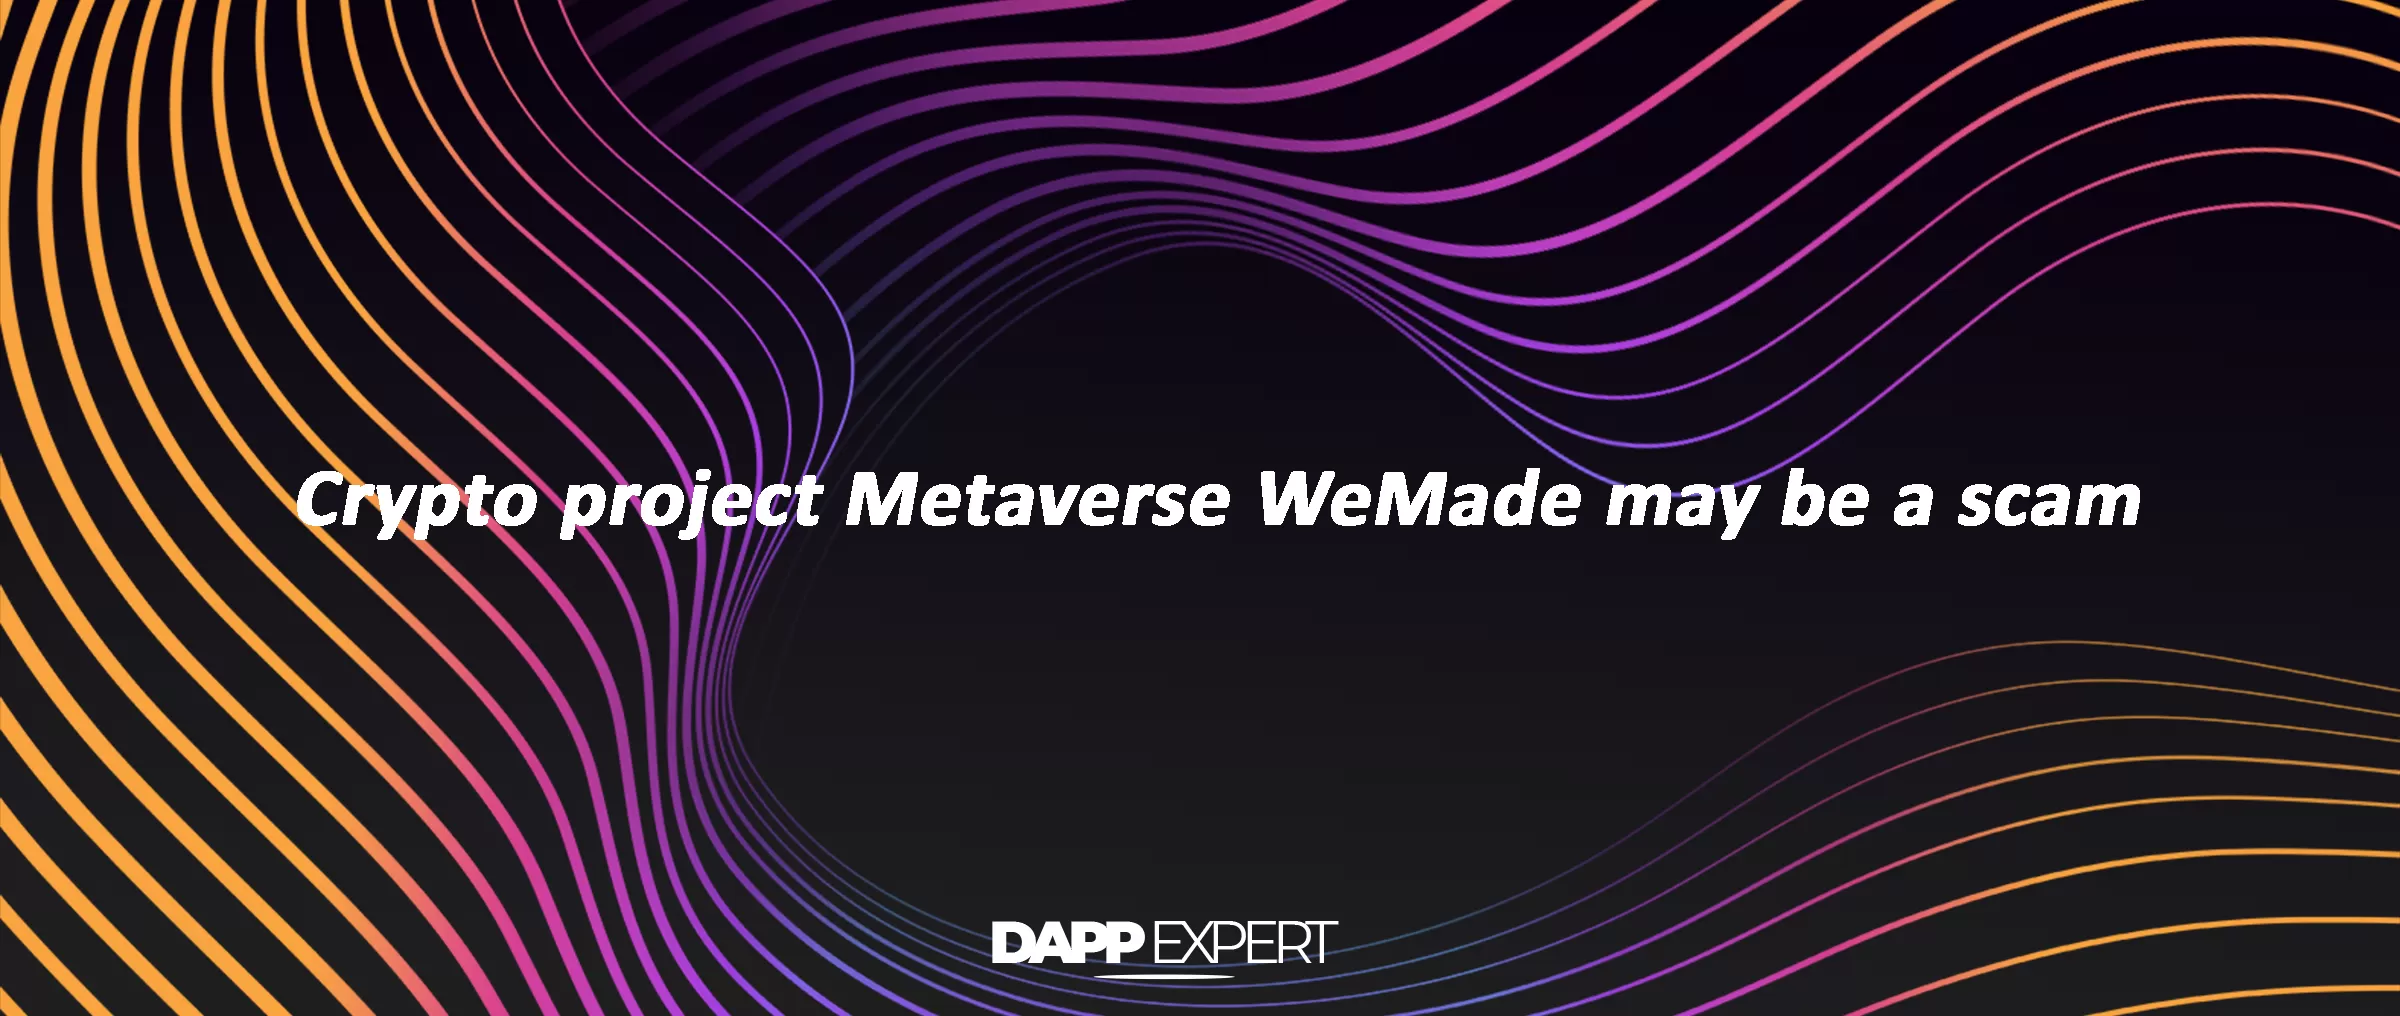 Crypto project Metaverse WeMade may be a scam